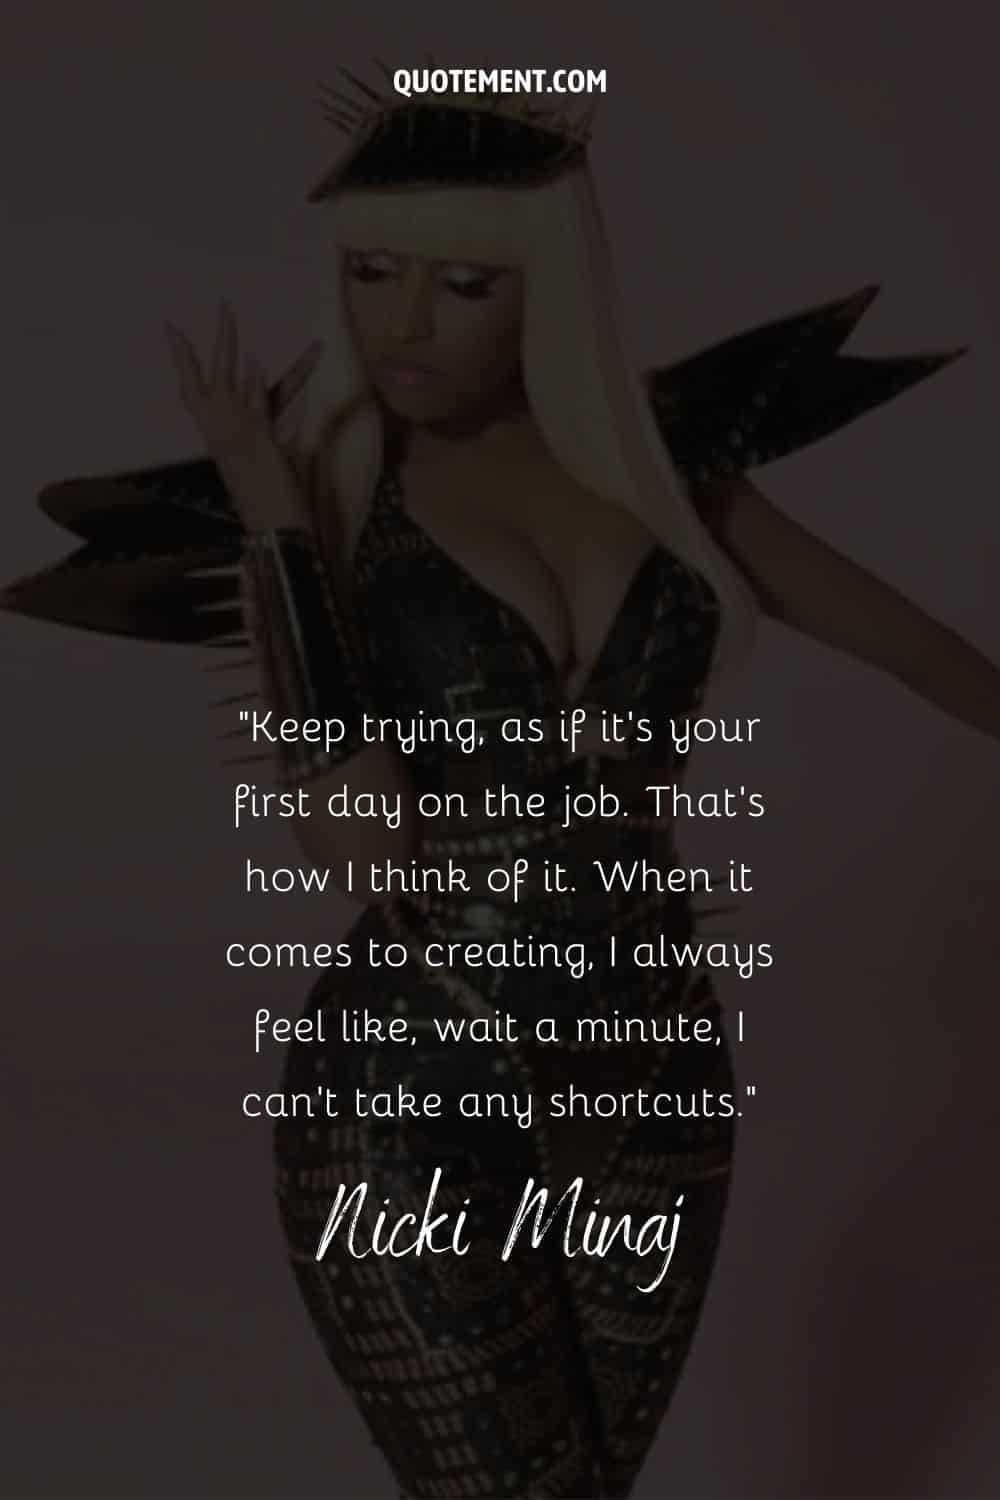 Inspiring quote by Nicki and her photo in the background, too